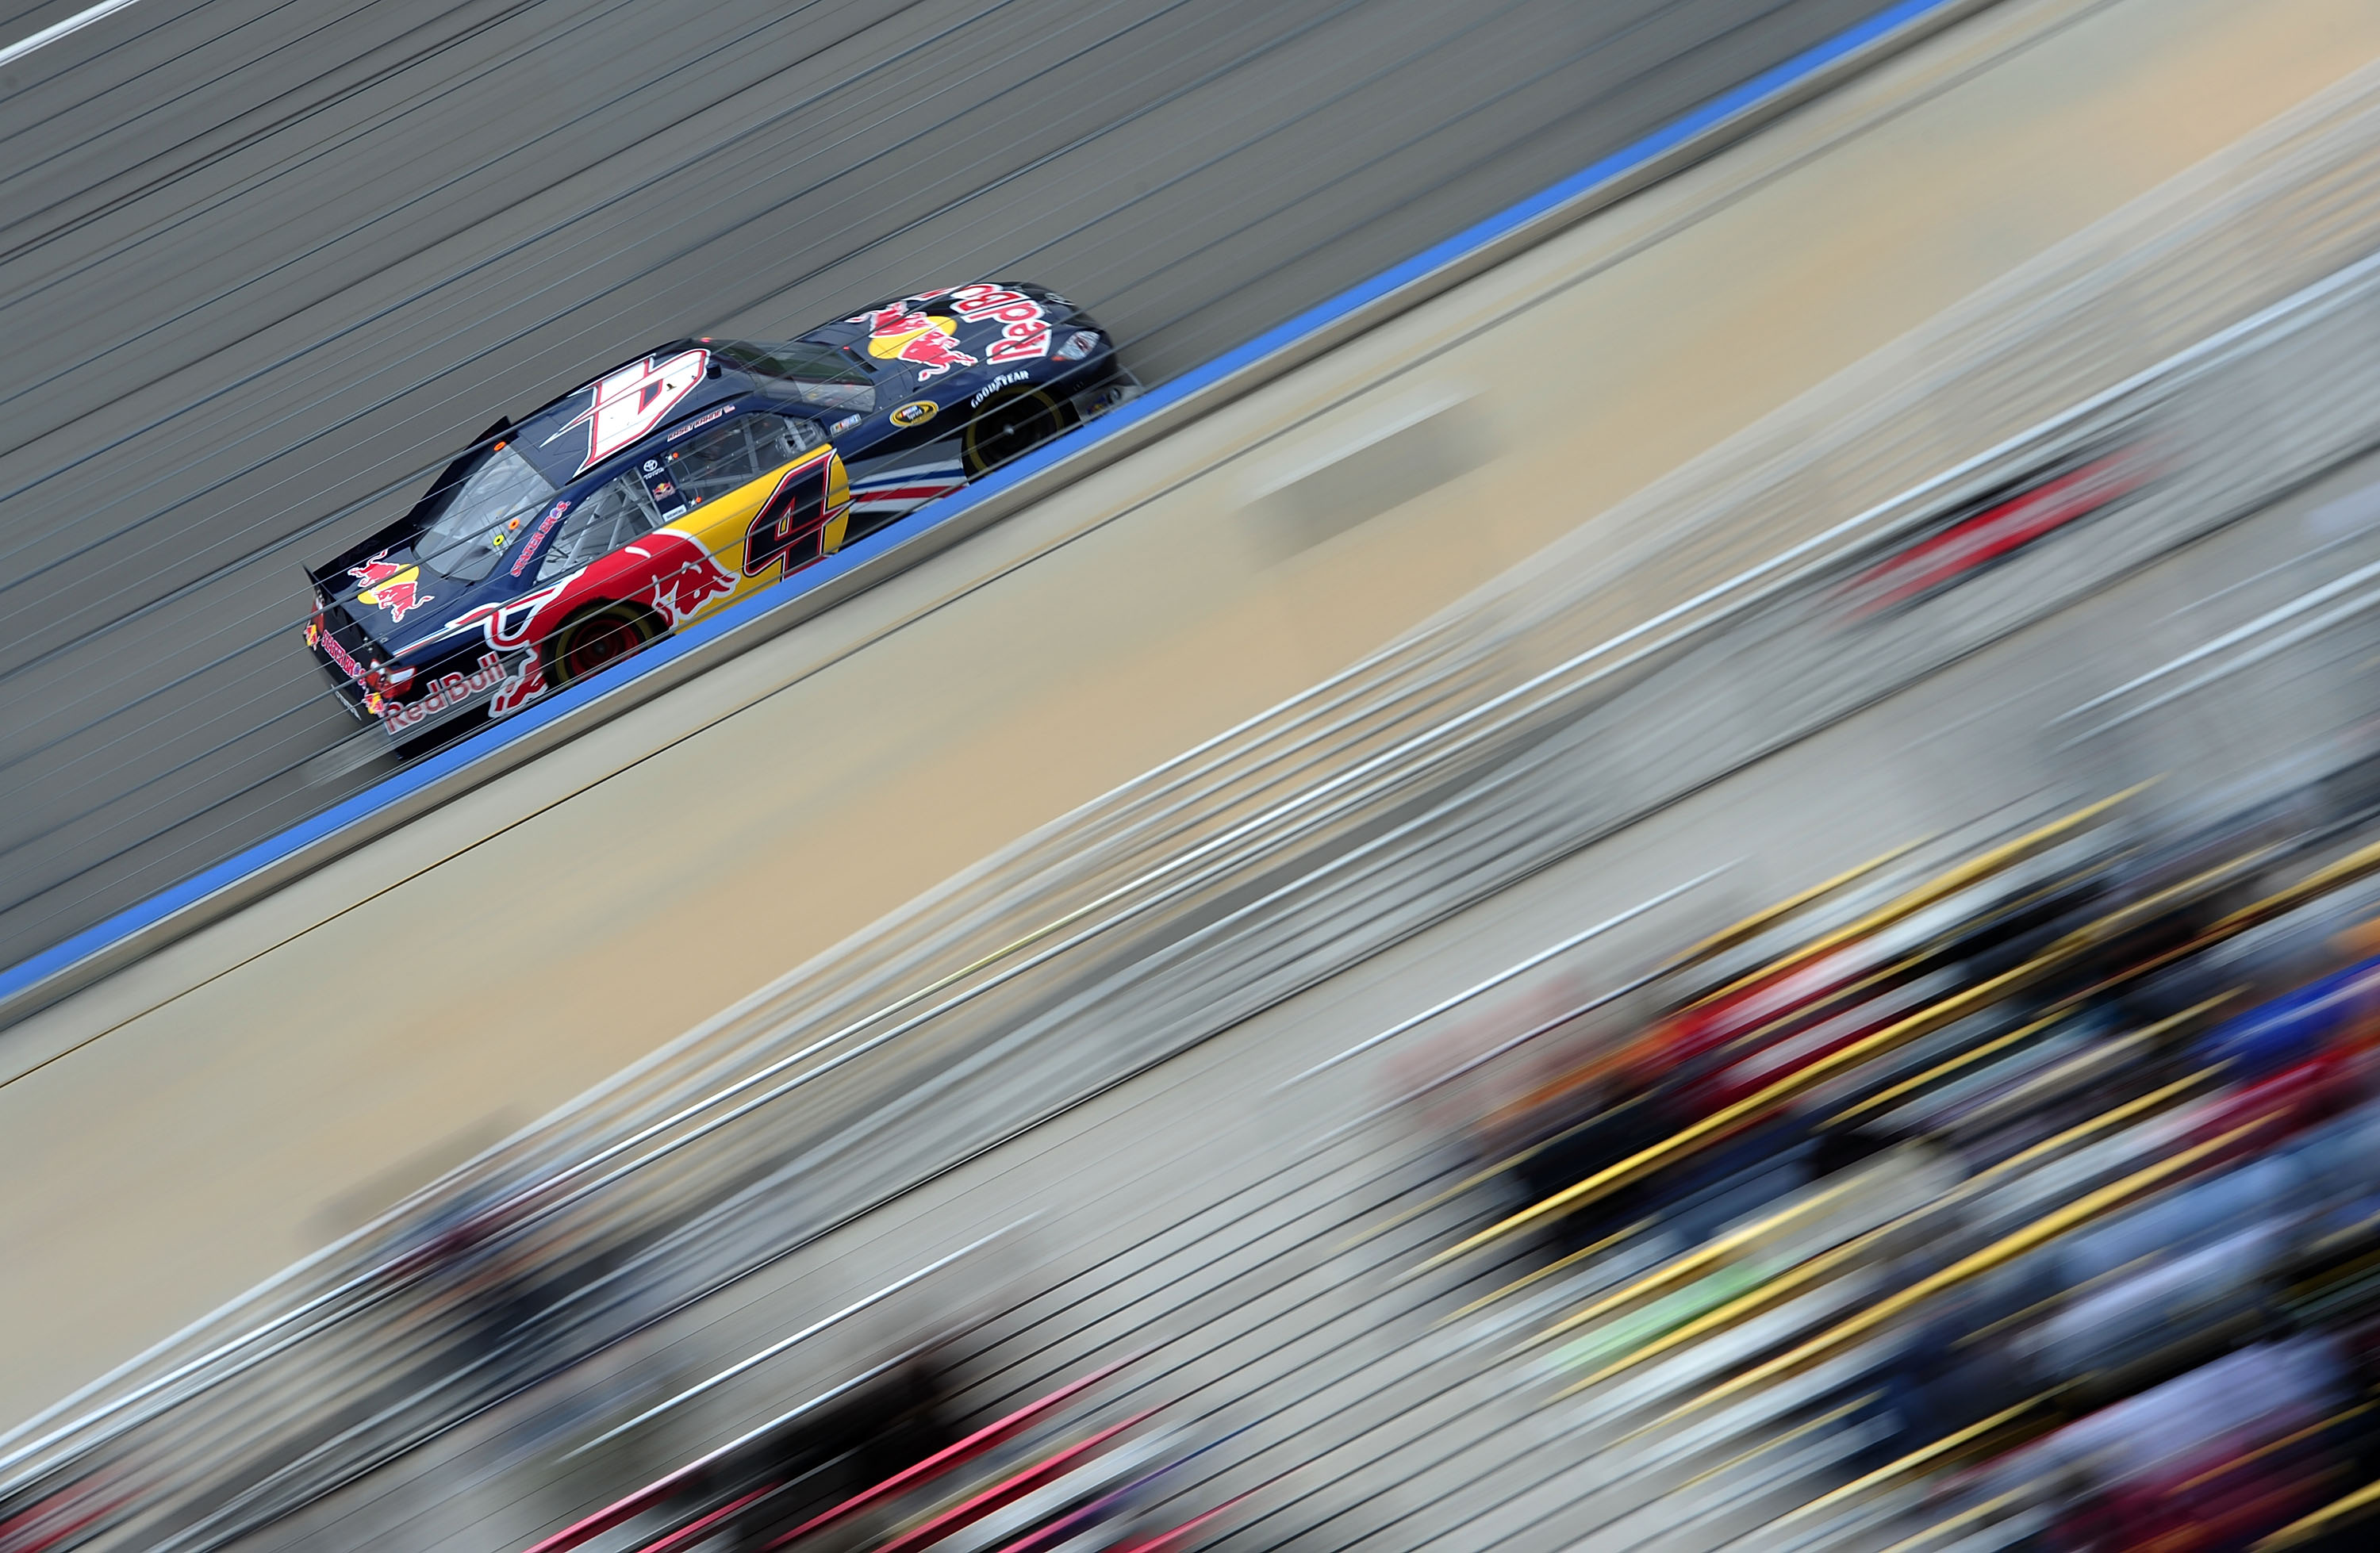 FONTANA, CA - MARCH 27:  Kasey Kahne, driver of the #4 Red Bull Toyota, races during the NASCAR Sprint Cup Series Auto Club 400 at Auto Club Speedway on March 27, 2011 in Fontana, California.  (Photo by Robert Laberge/Getty Images for NASCAR)